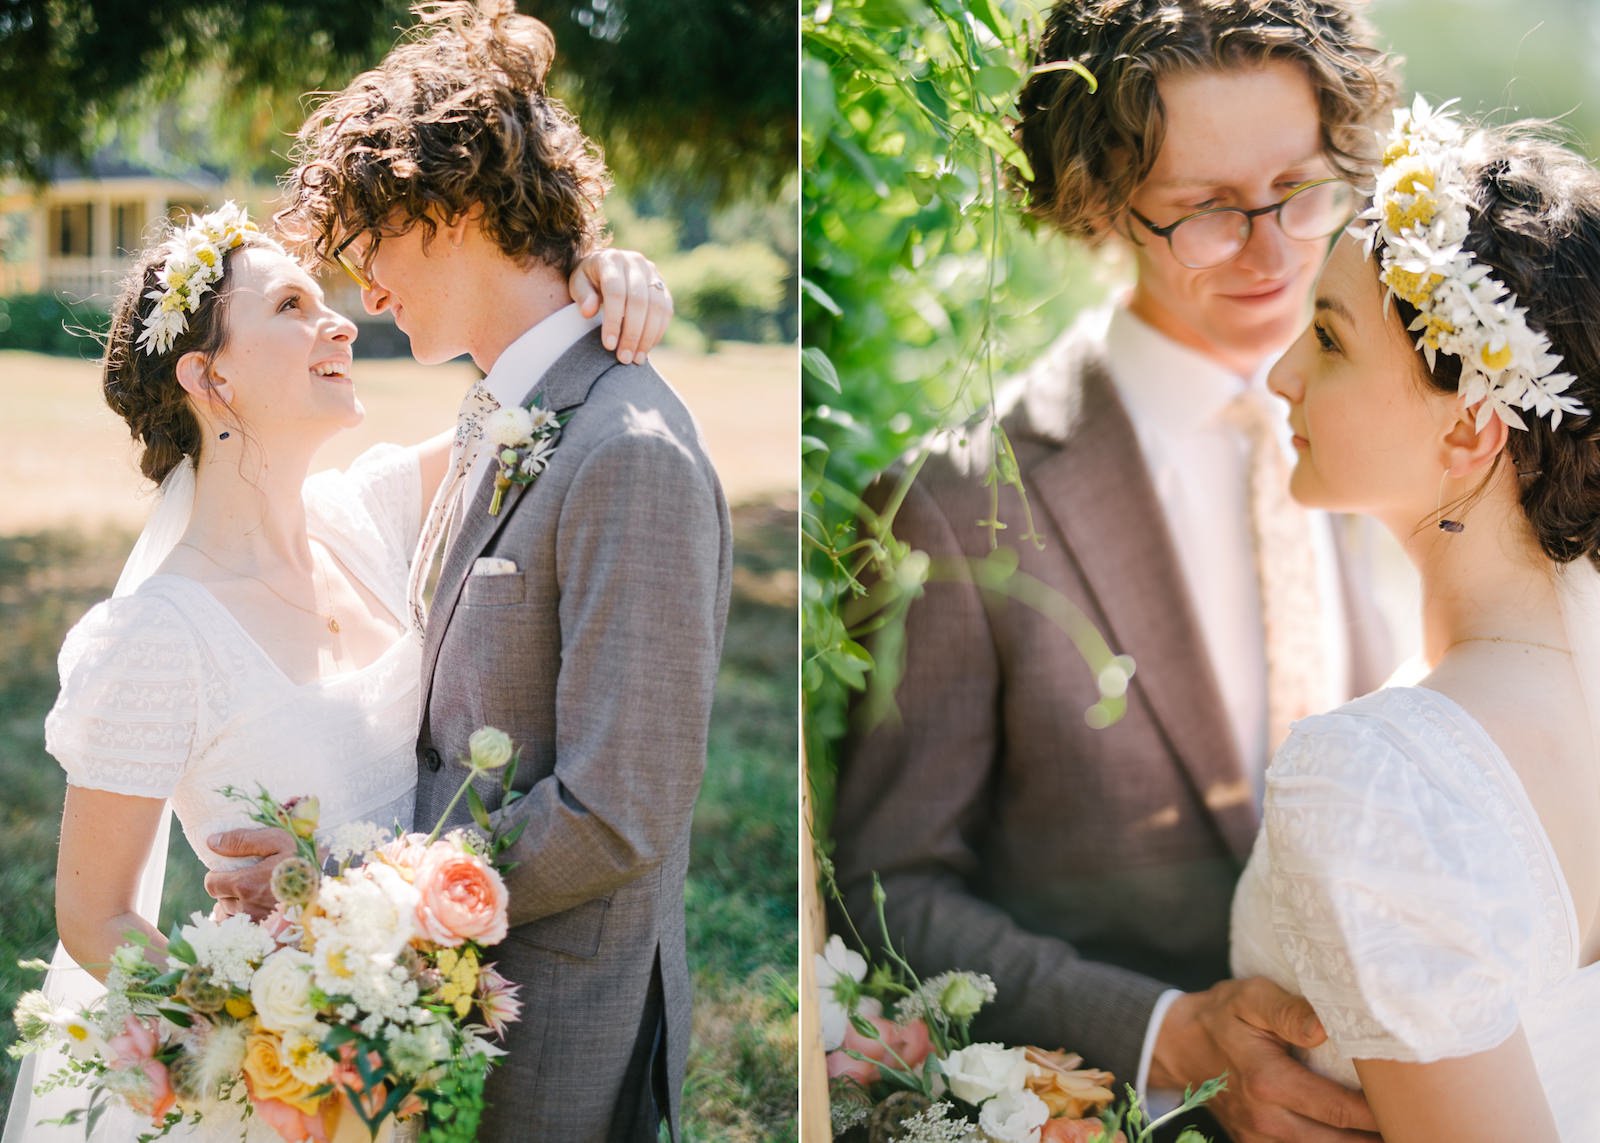  Bride with flower crown and groom surrounded by green vines 